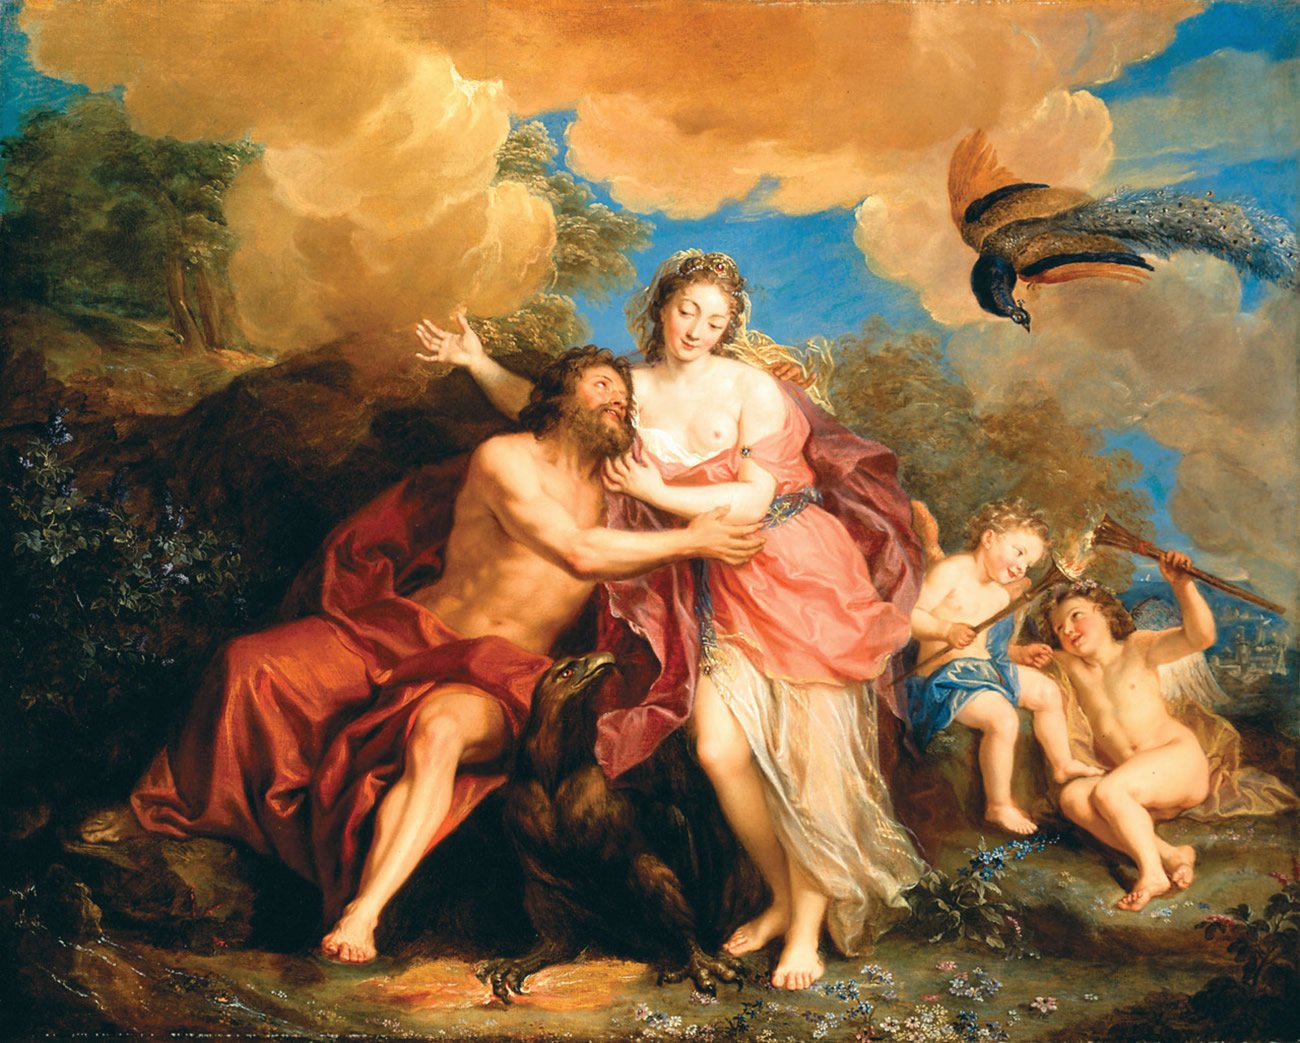 This painting represents Zeus and Hera as a lovely pair of spouses sitting under the cheerful blue sky with nearby vanilla clouds. A peacock flies above them and two little kids are playing nearby.